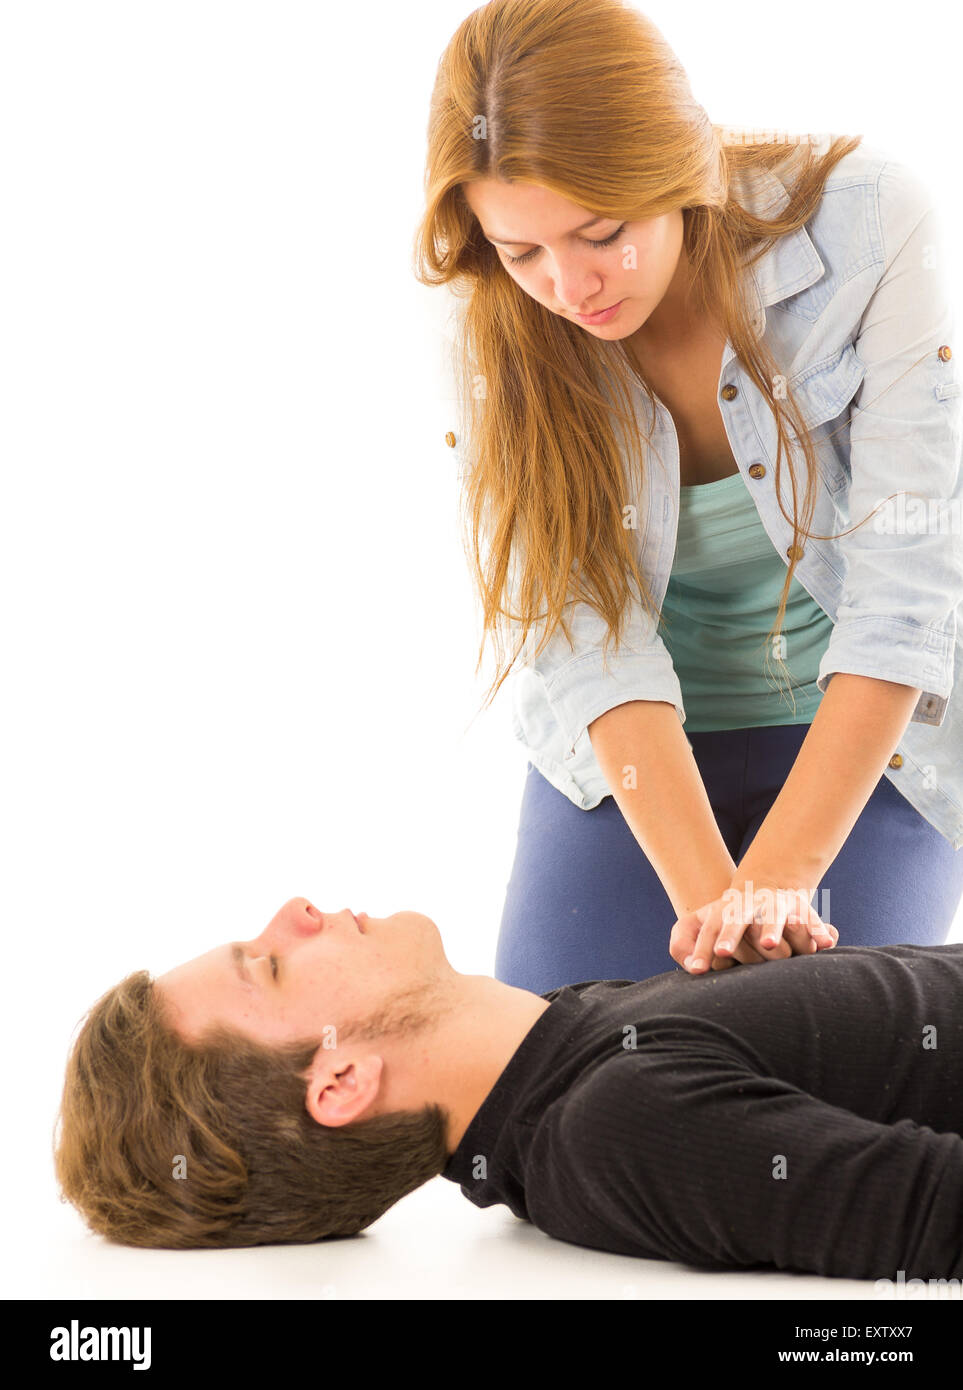 Couple demonstrating first aid techniques with woman applying cpr on male pattient lying down Stock Photo